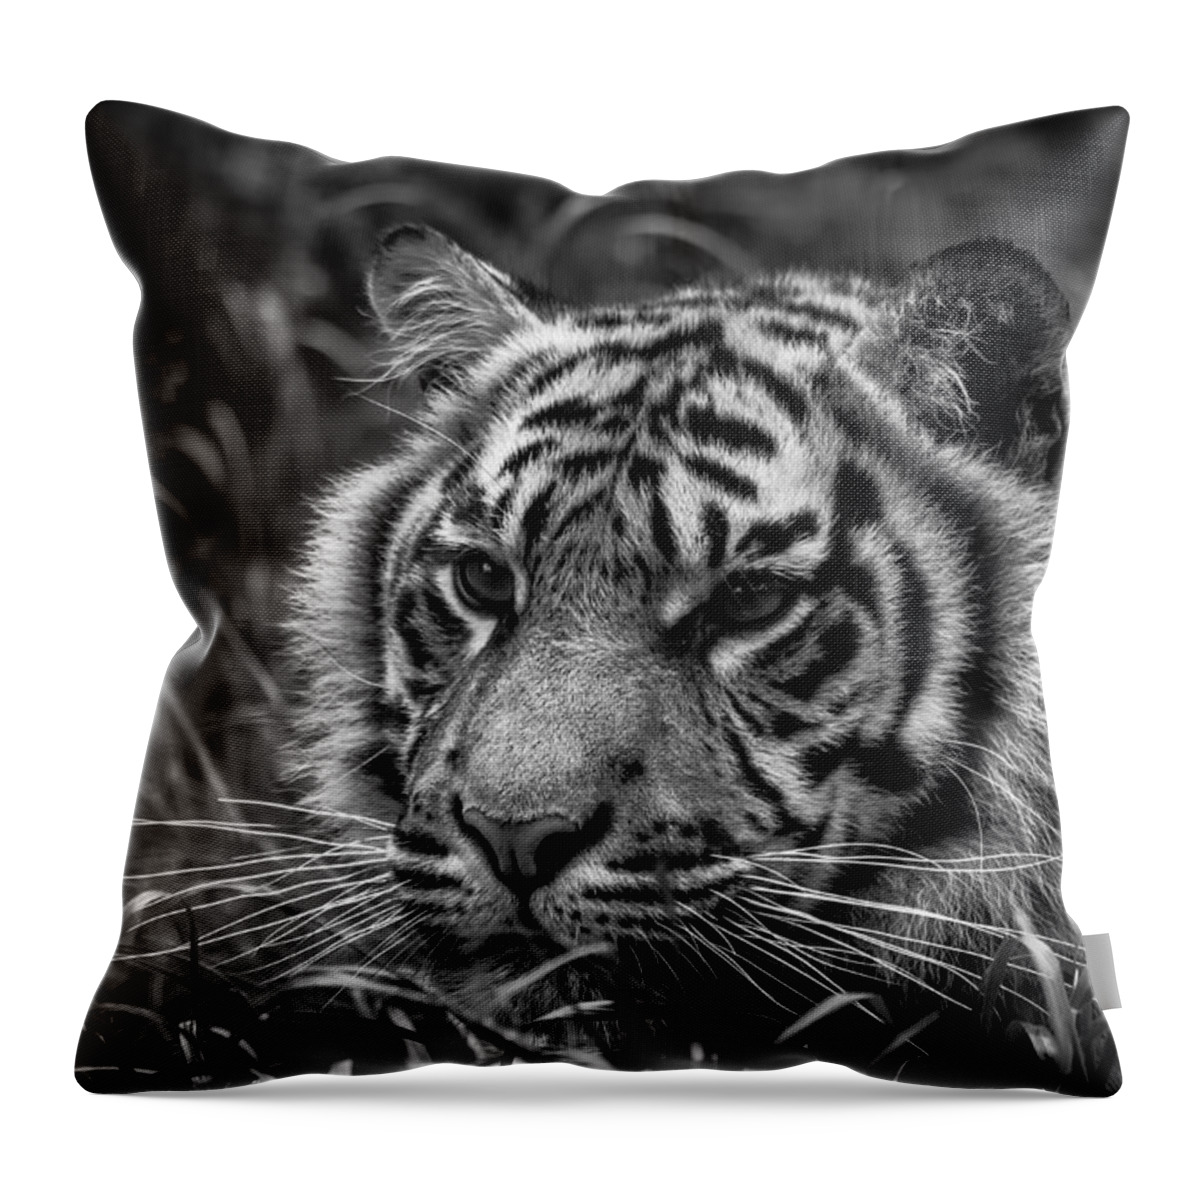 Tiger Throw Pillow featuring the photograph Baby Stripes by Darren Wilkes